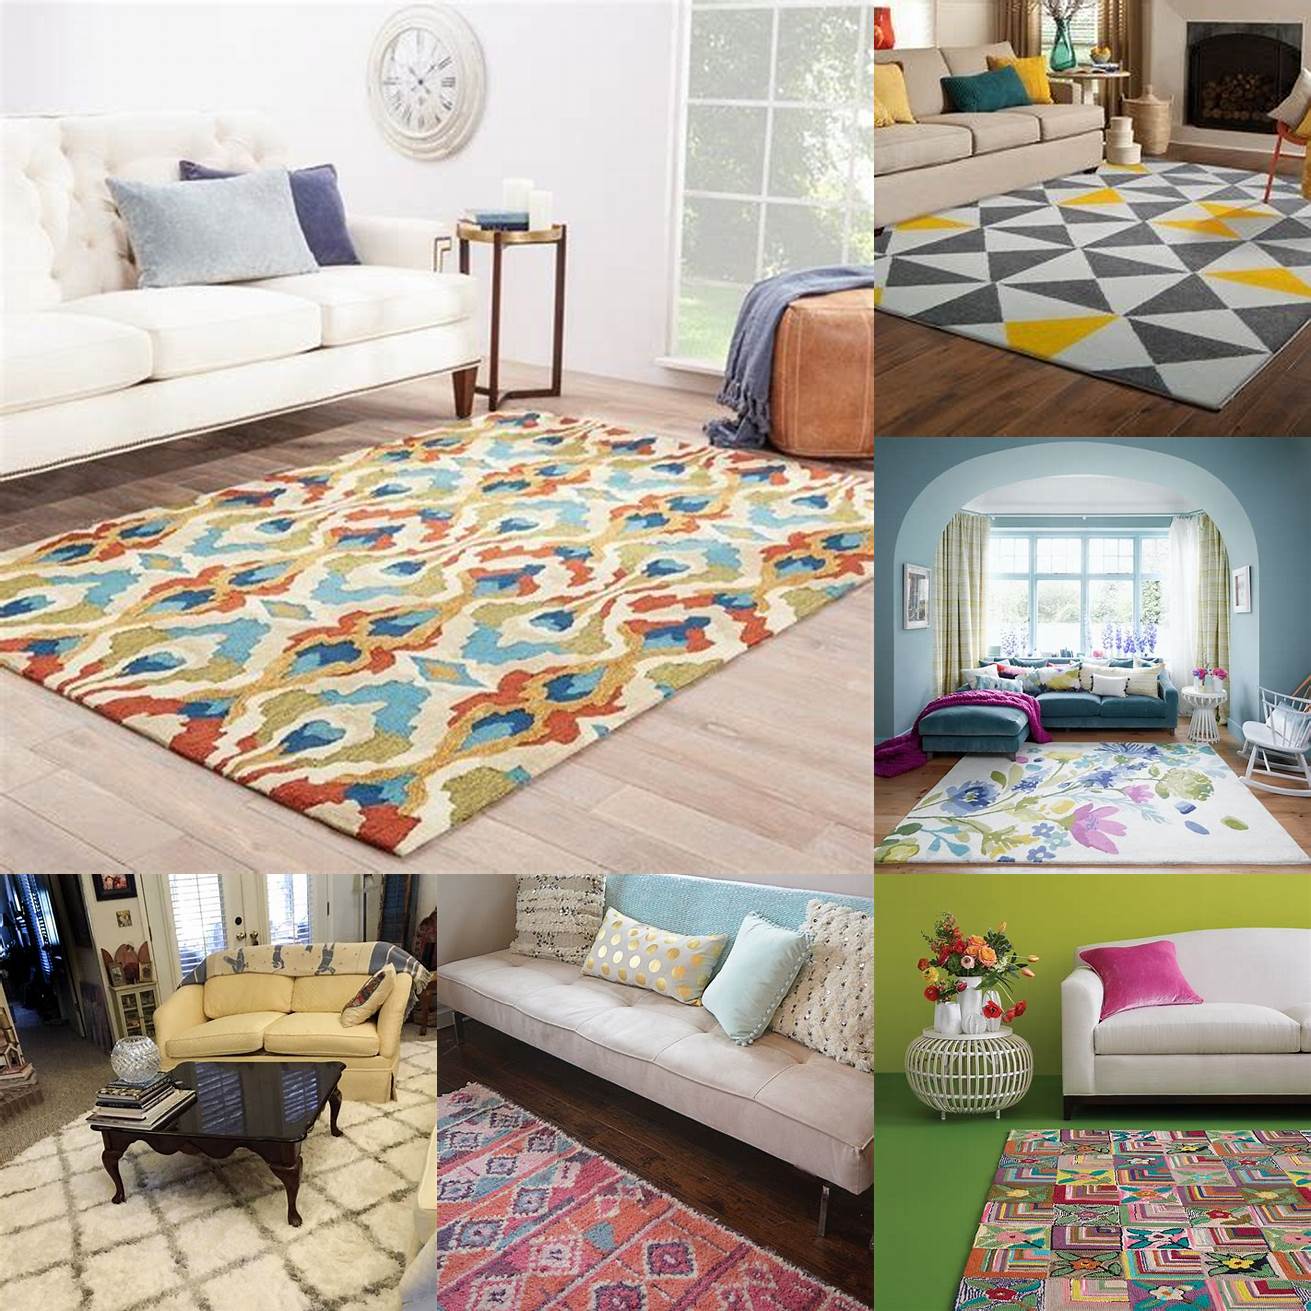 Use a rug as a focal point in a room